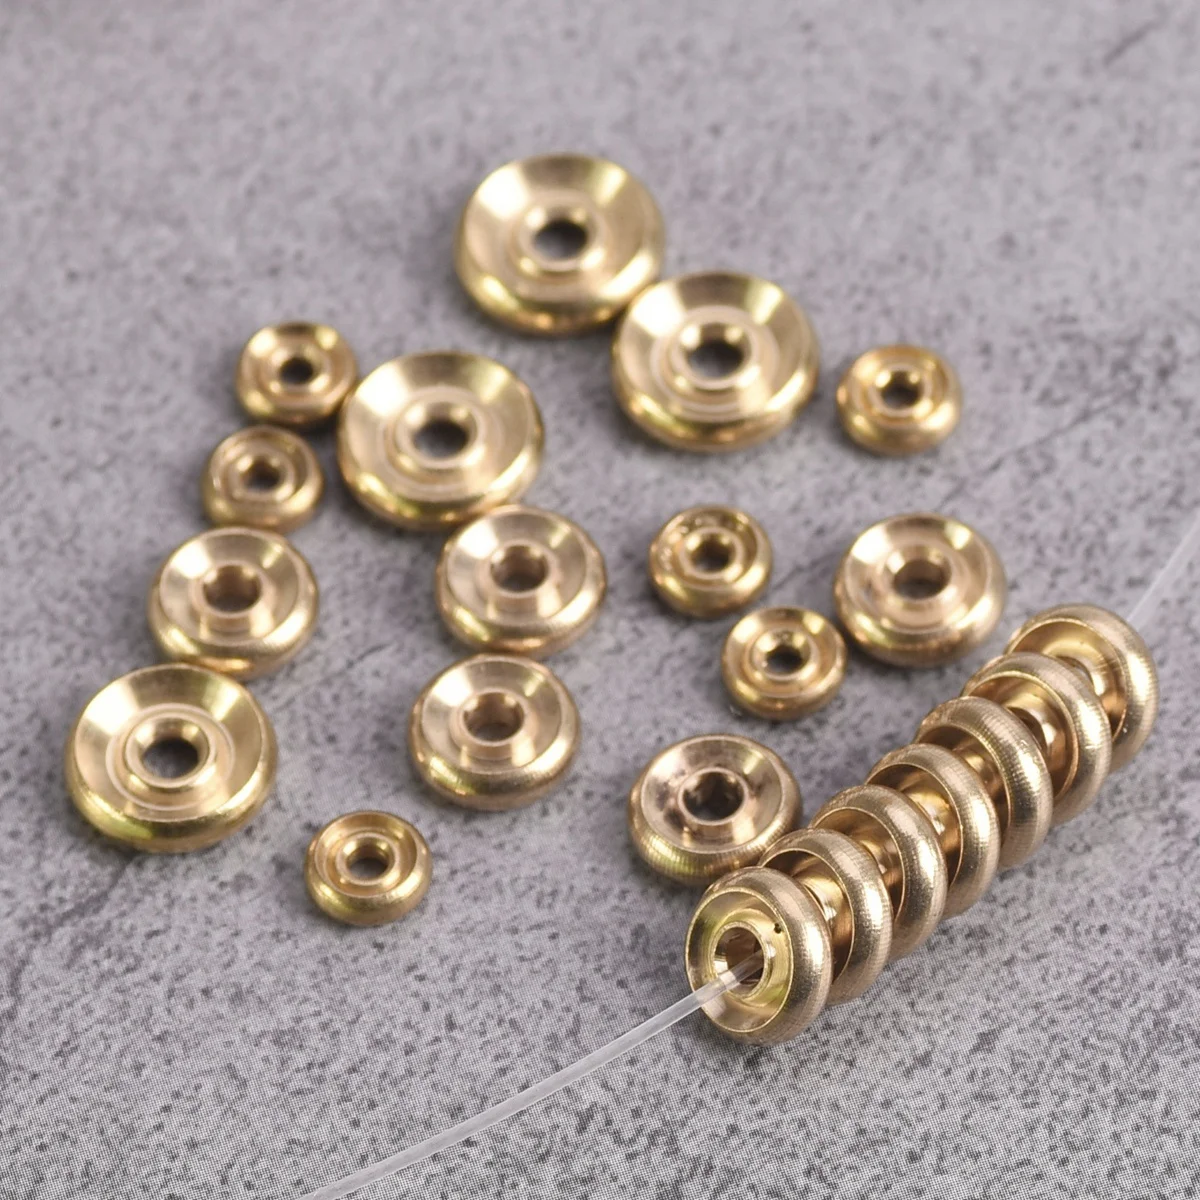 30pcs Flat Round Rondelle 6mm 8mm 10mm Solid Brass Metal Light Gold Color Loose Spacer Beads lot for Jewelry Making Findings